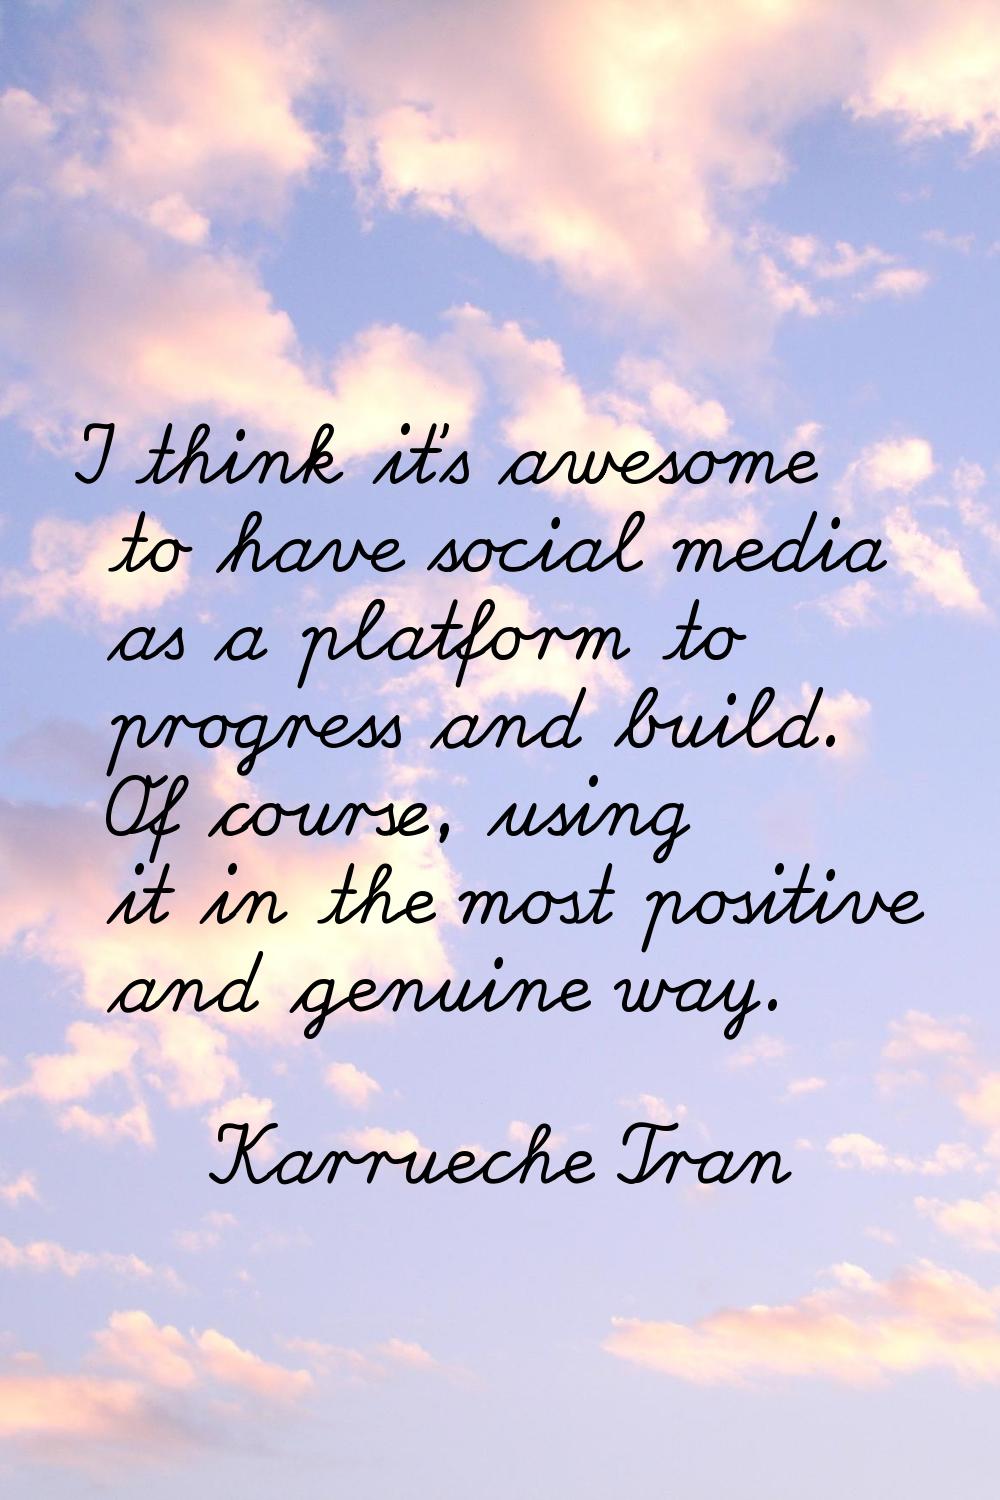 I think it's awesome to have social media as a platform to progress and build. Of course, using it 